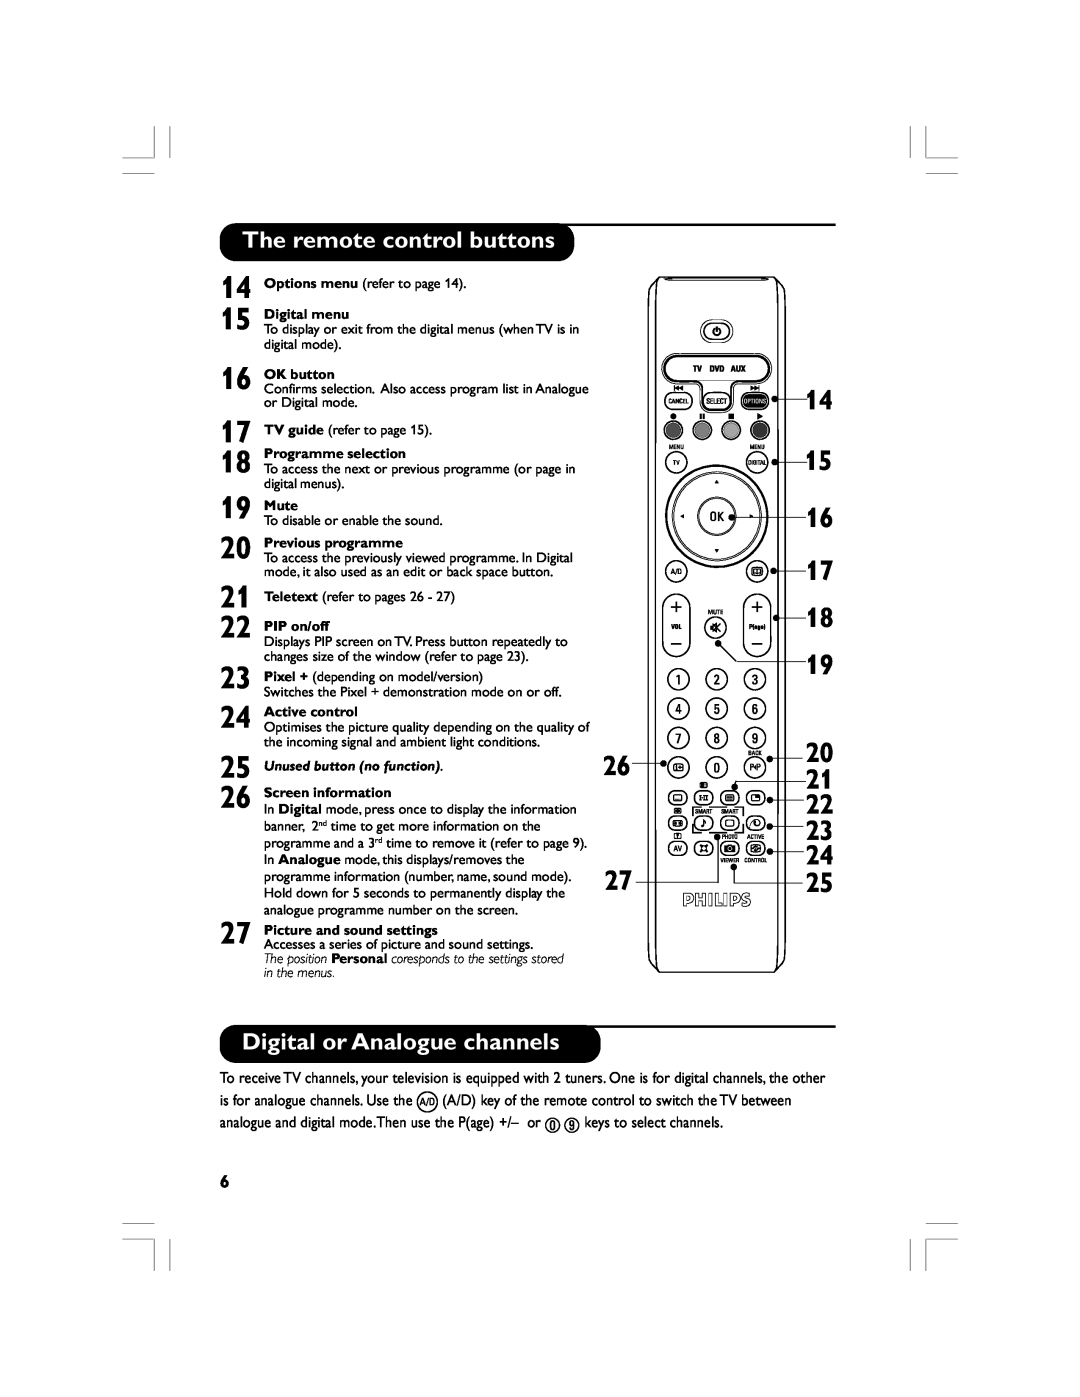 Philips 32PF5520D manual Digital or Analogue channels, The remote control buttons, Options menu refer to page 